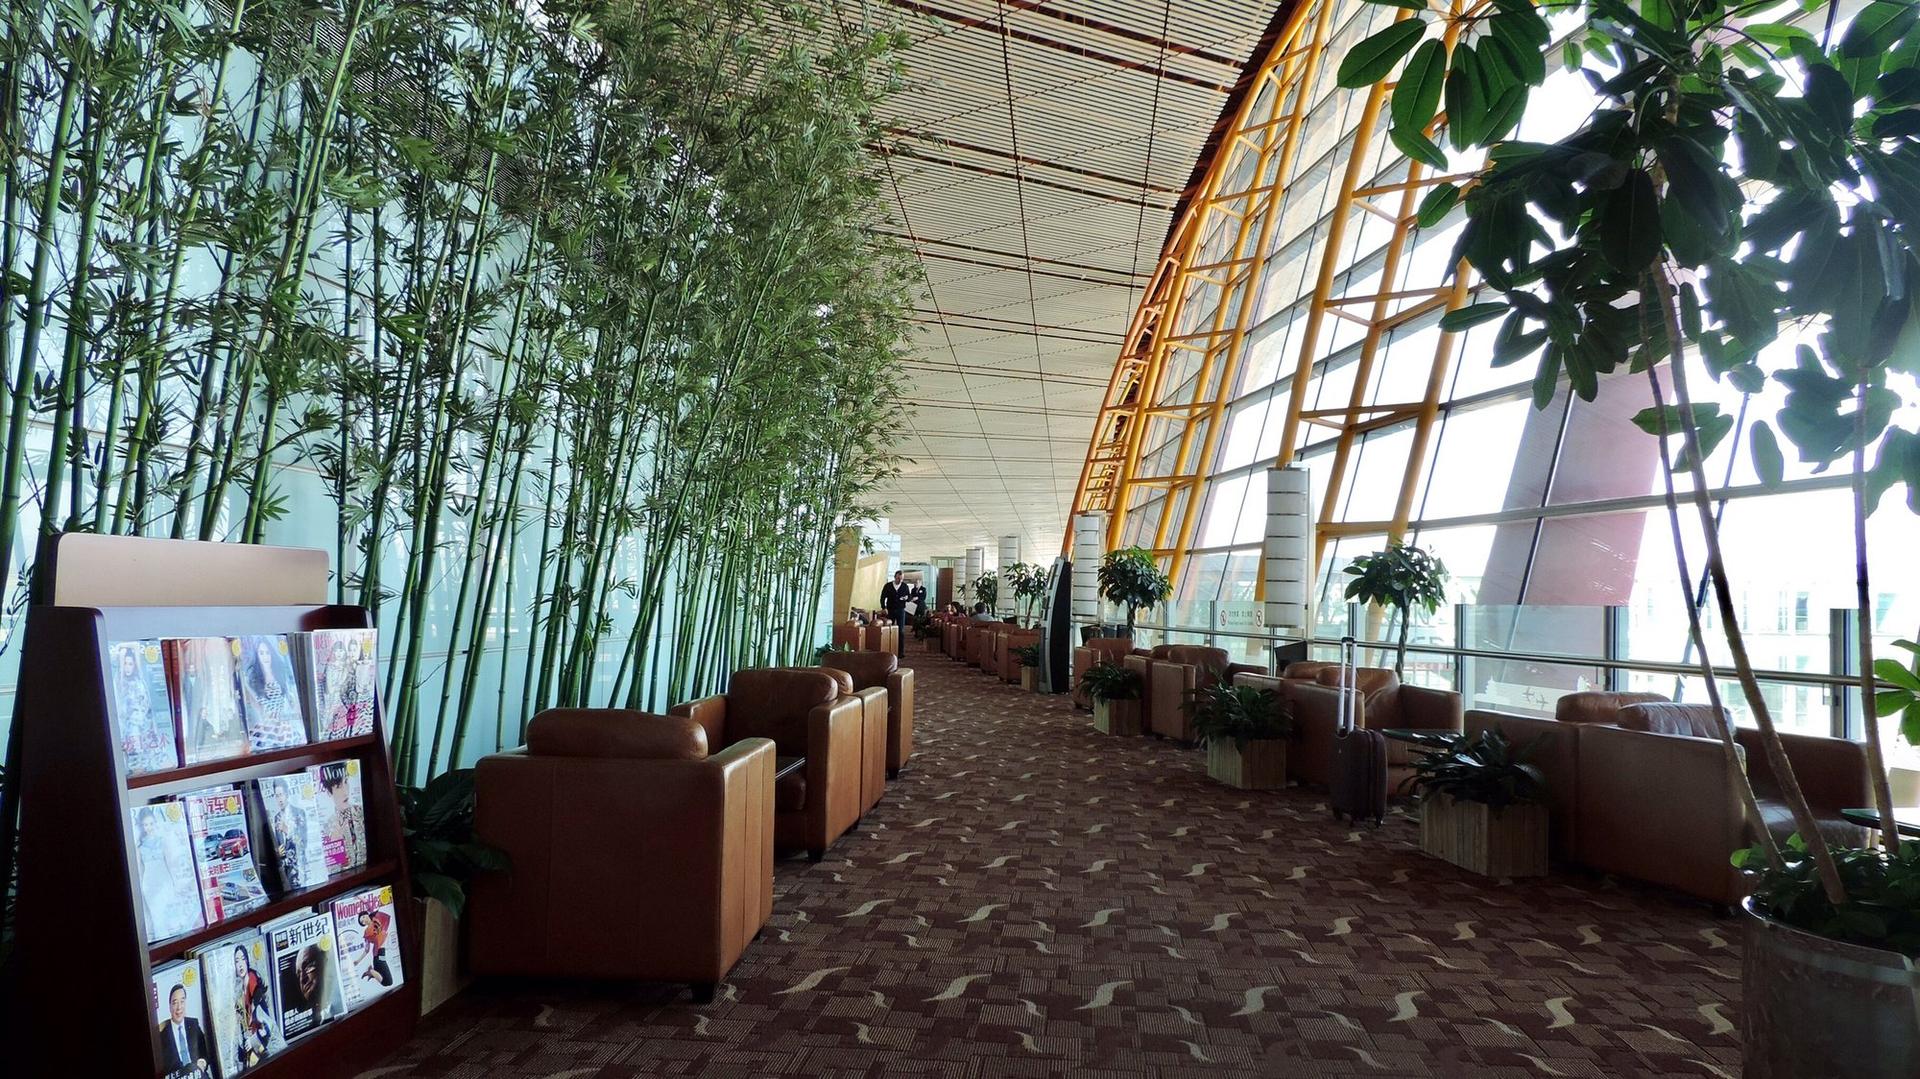 Air China International First Class Lounge image 1 of 38